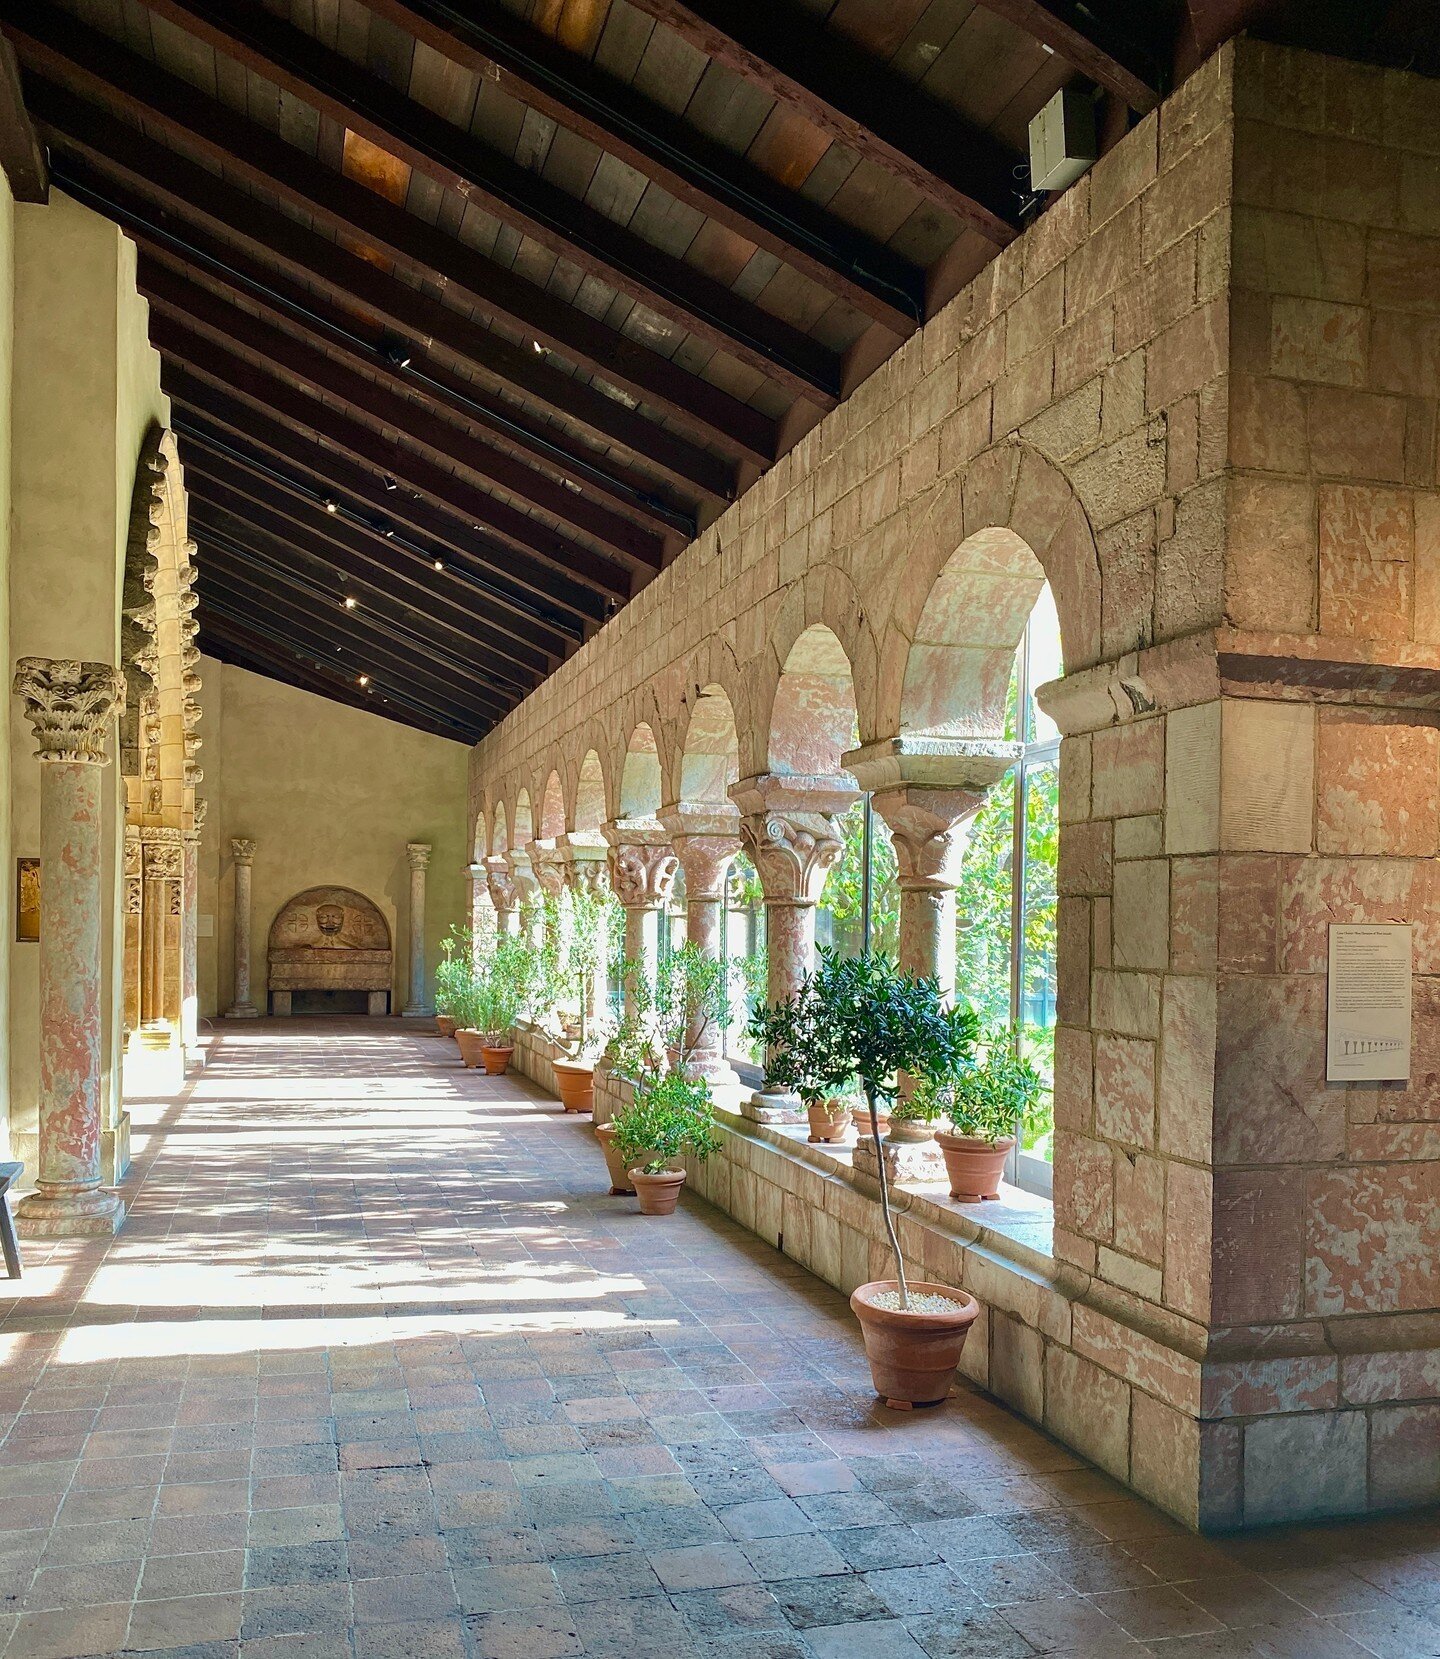 Gorgeous Romanesque architecture and beautiful autumn views are a must-see at the Met Cloisters! 😍 @metcloisters
🏰
🌳
🗝️
☀️
🚕
#nyc #newyork #themet #cloisters #metcloisters #art #metropolitanmuseumofart #met #museum #newyorkcity #metmuseum #natur